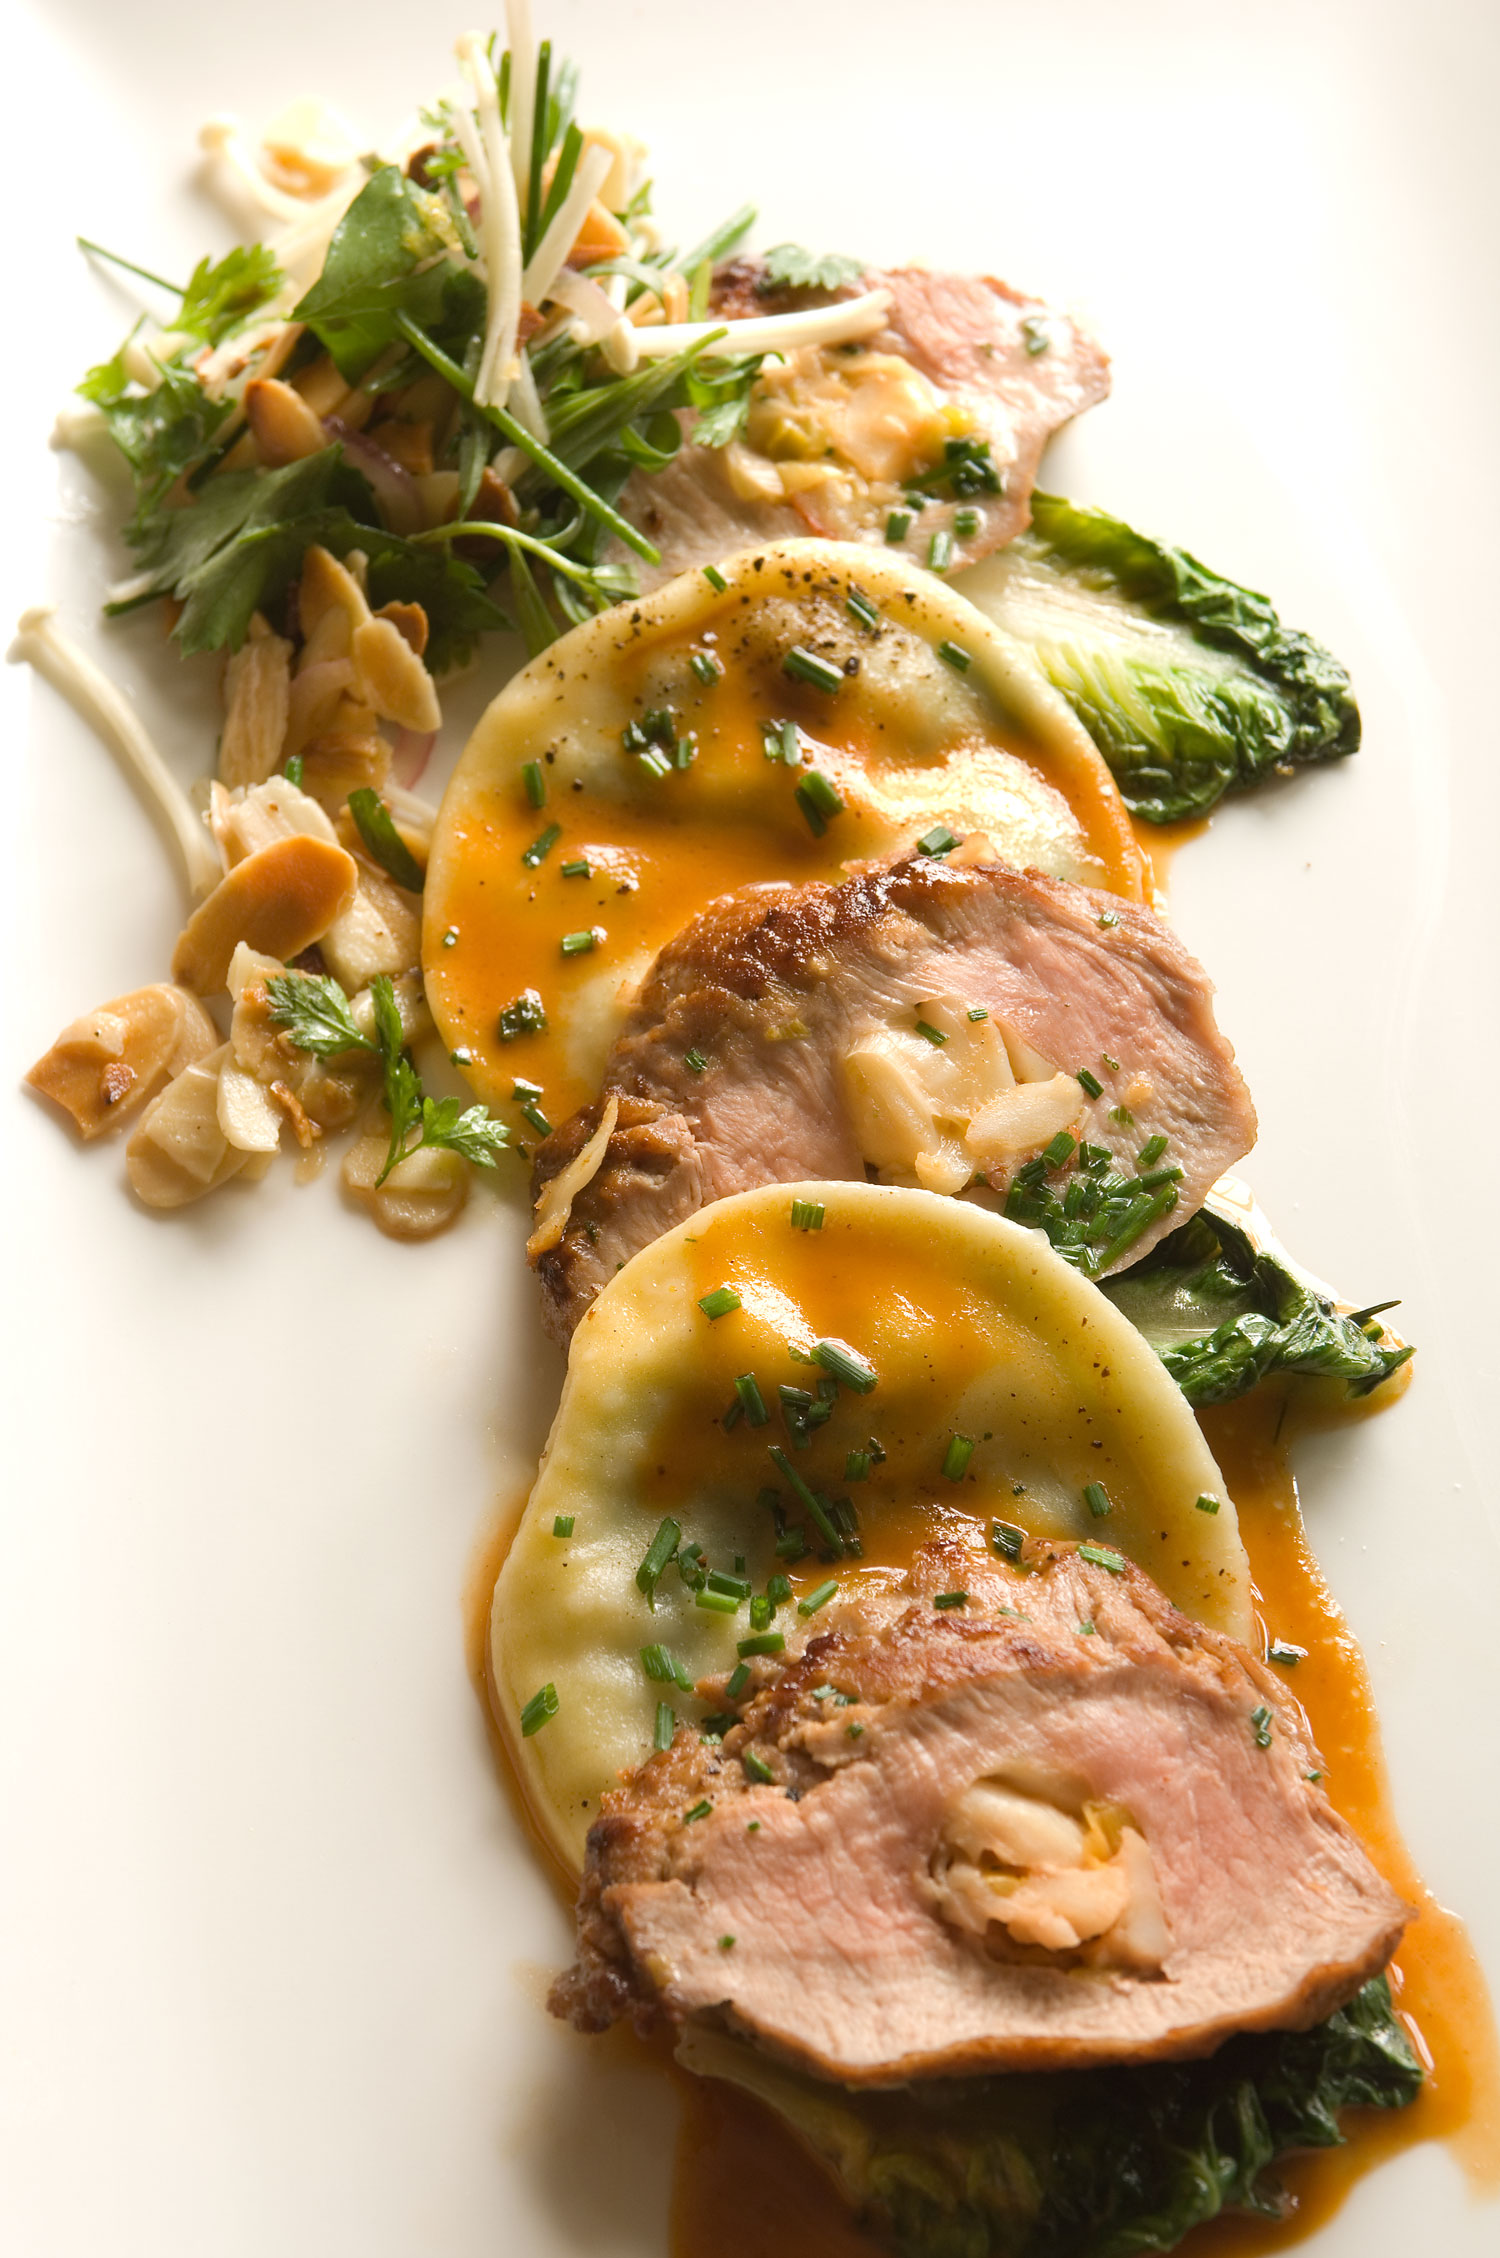 Lobster-Stuffed Veal Tenderloin with Goat Cheese and Quail Egg Ravioli